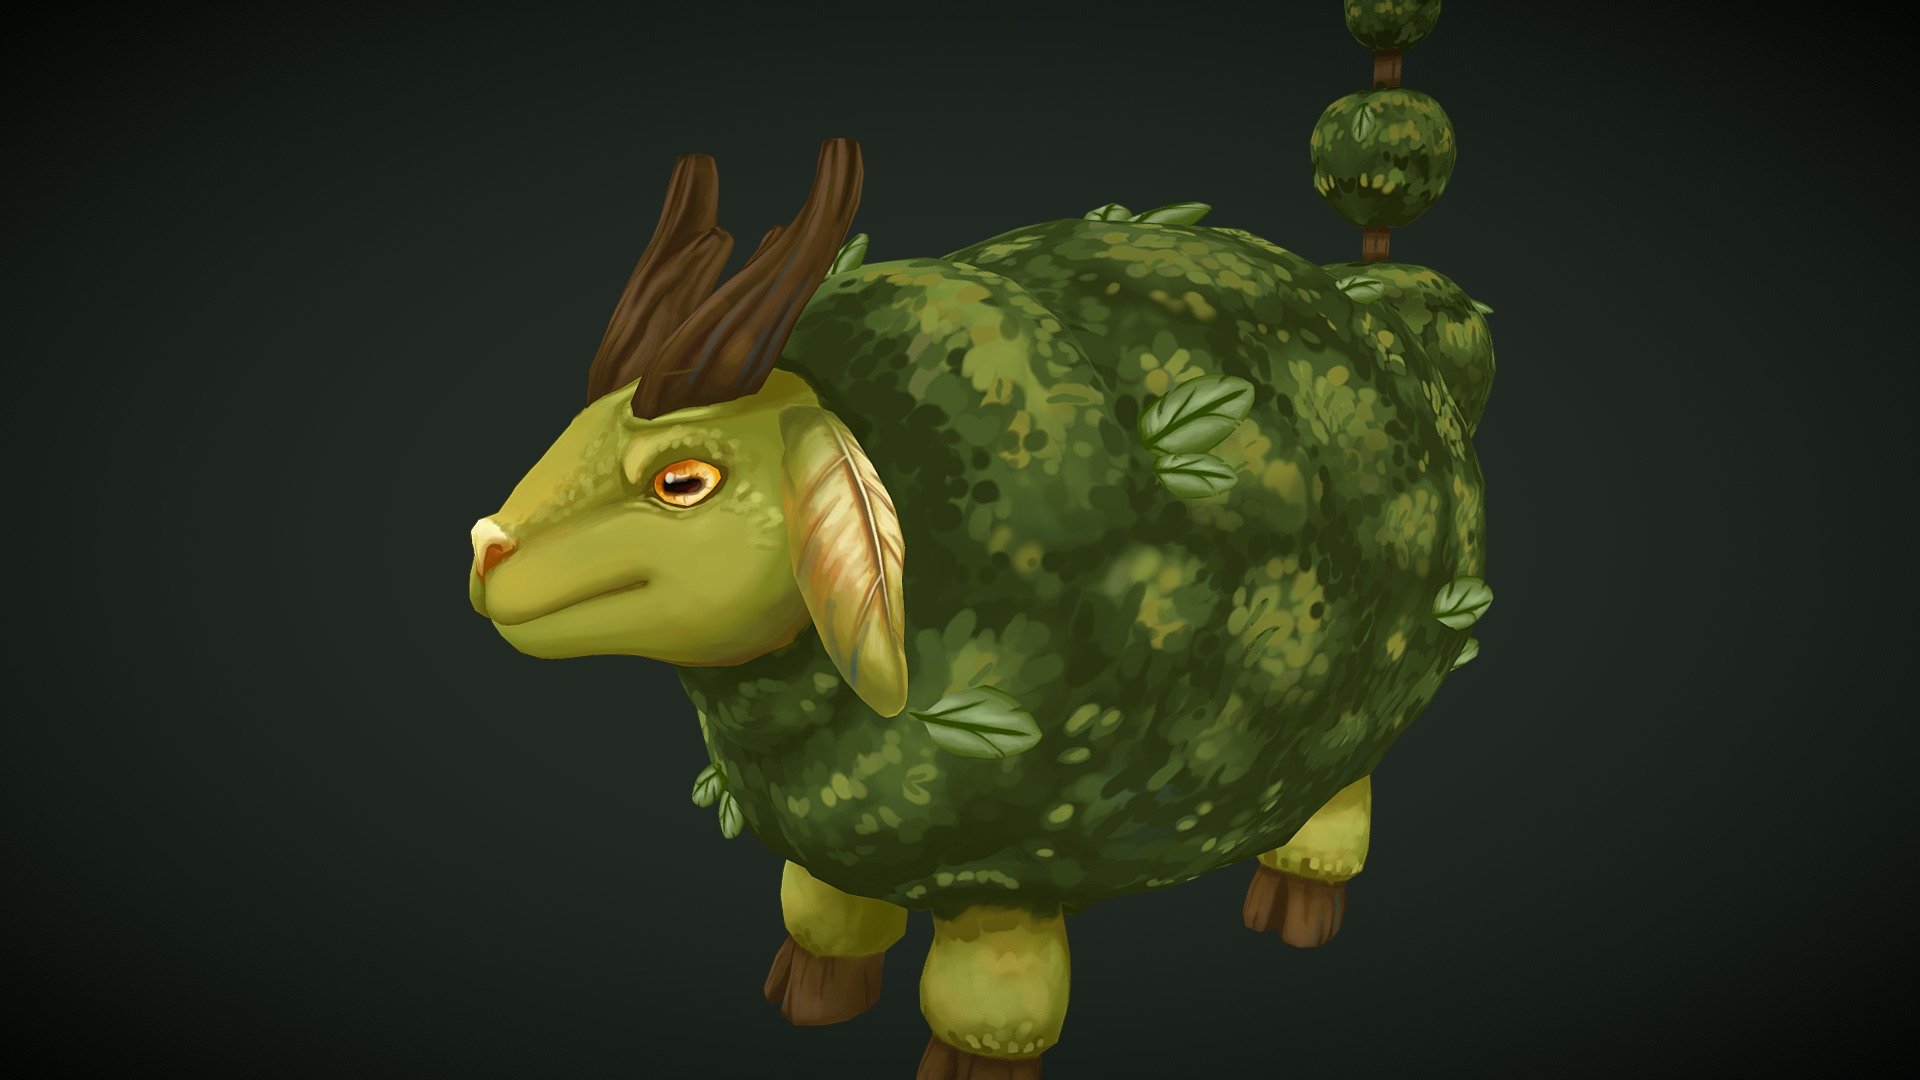 Here is a little sheep creature I created for a personal project!

InkRoseInc.com - Shrub Sheep - 3D model by inkrose 3d model